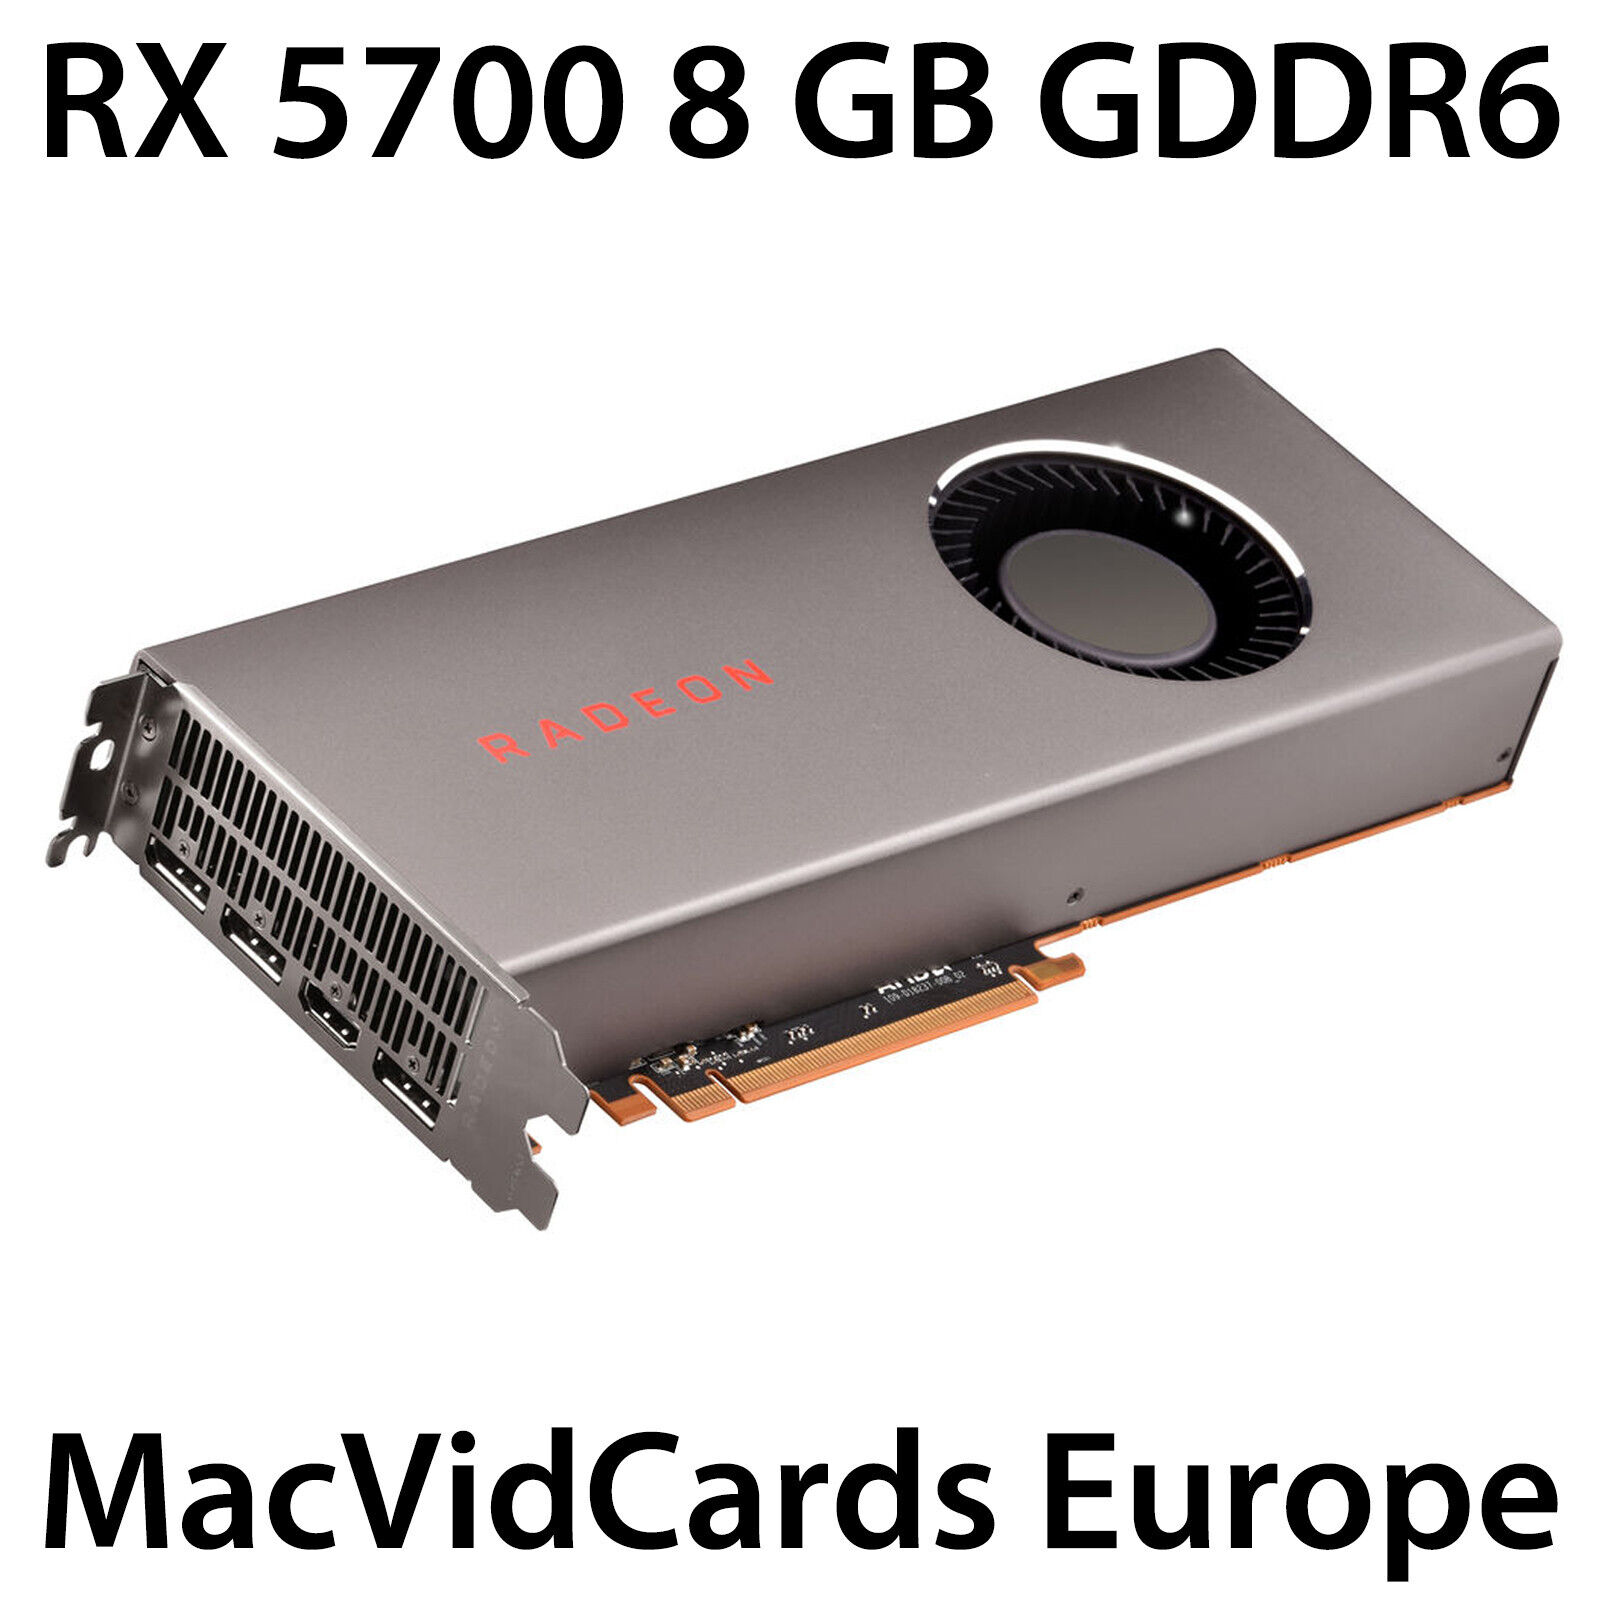 MacVidCards AMD Radeon RX 5700 8 GB GDDR6 for Apple Mac Pro with BOOT SCREEN